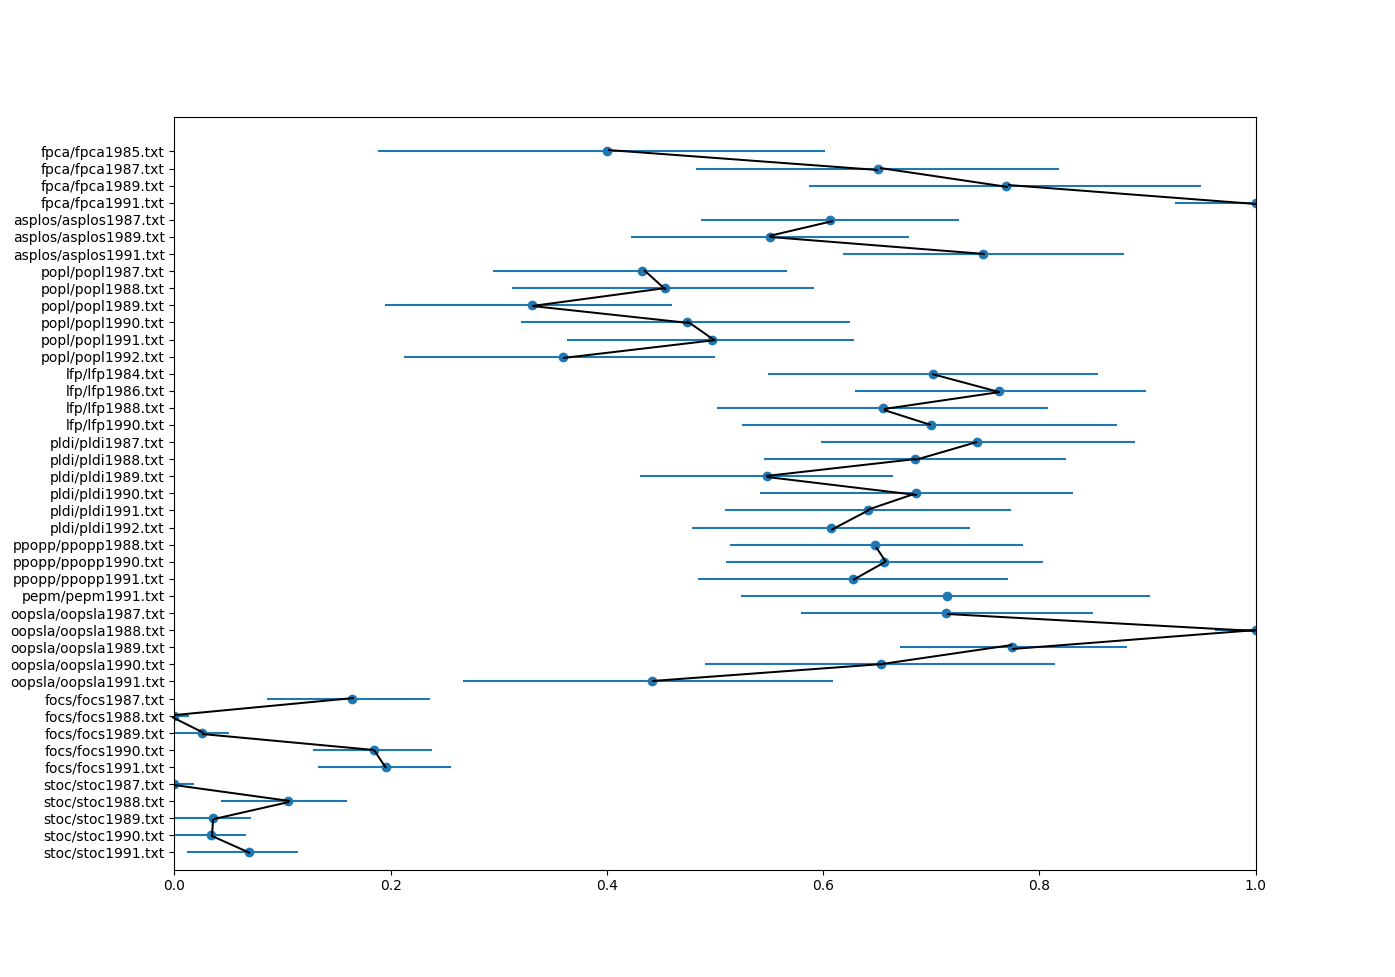 Plot of results I generated